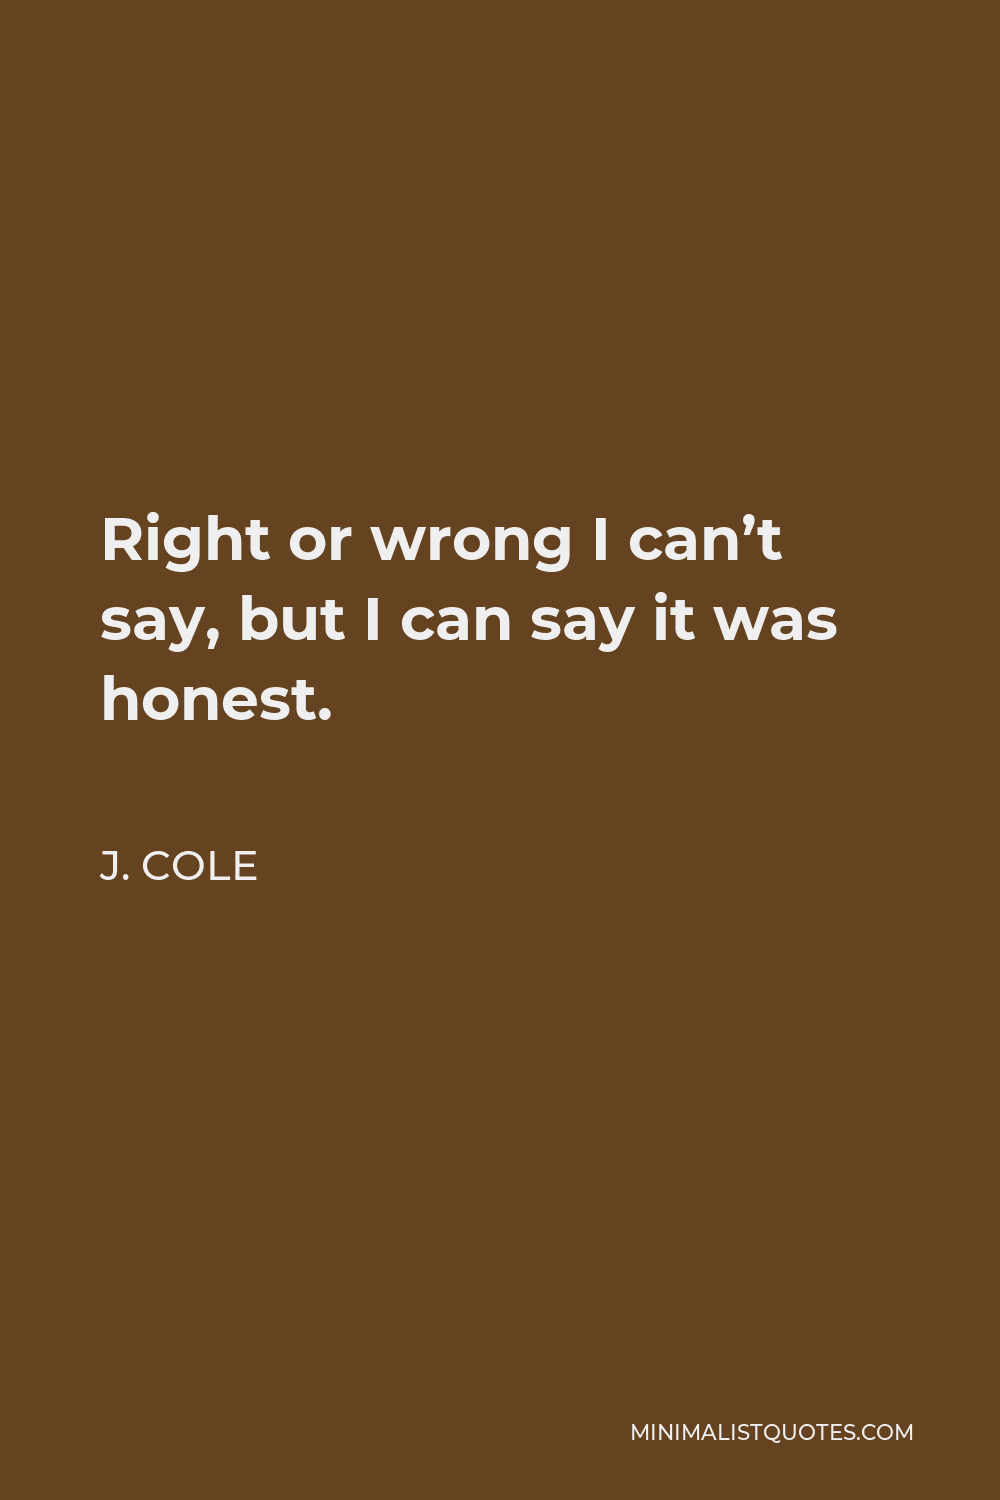 J. Cole Quote - Right or wrong I can’t say, but I can say it was honest.